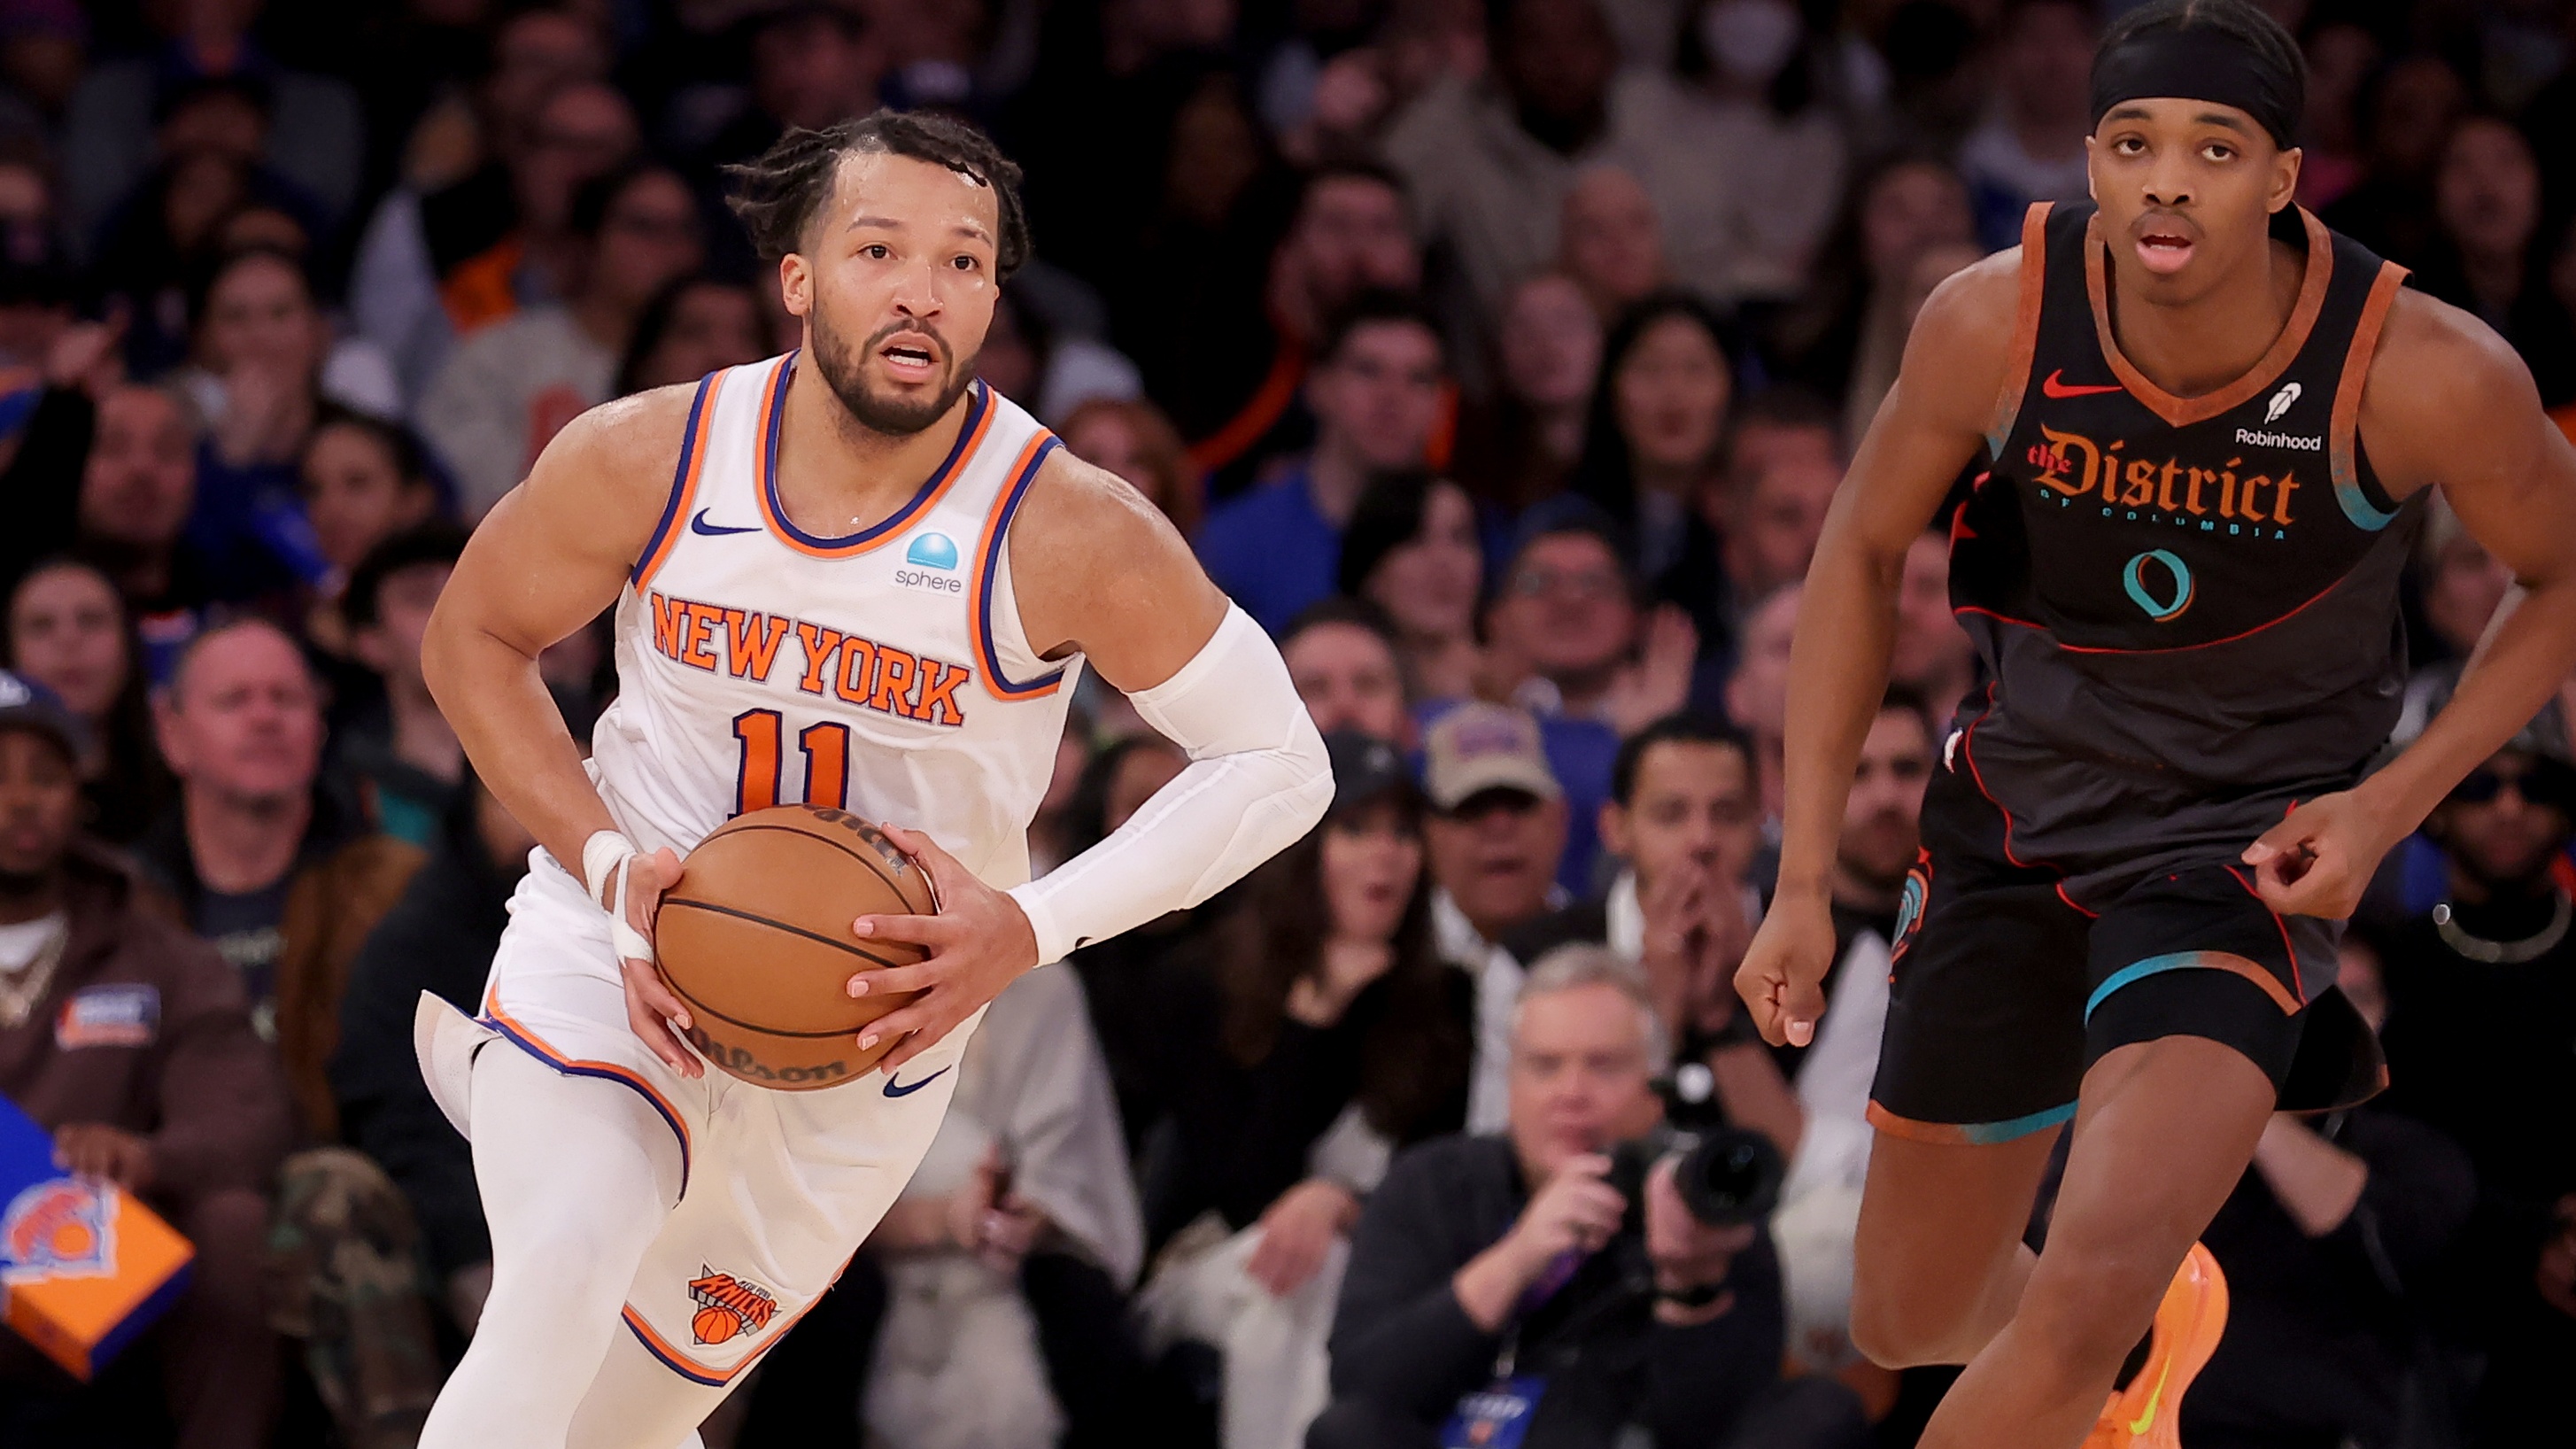 Jalen Brunson scores 41 points to lead the Knicks to a 113-109 victory over  the Wizards - The San Diego Union-Tribune